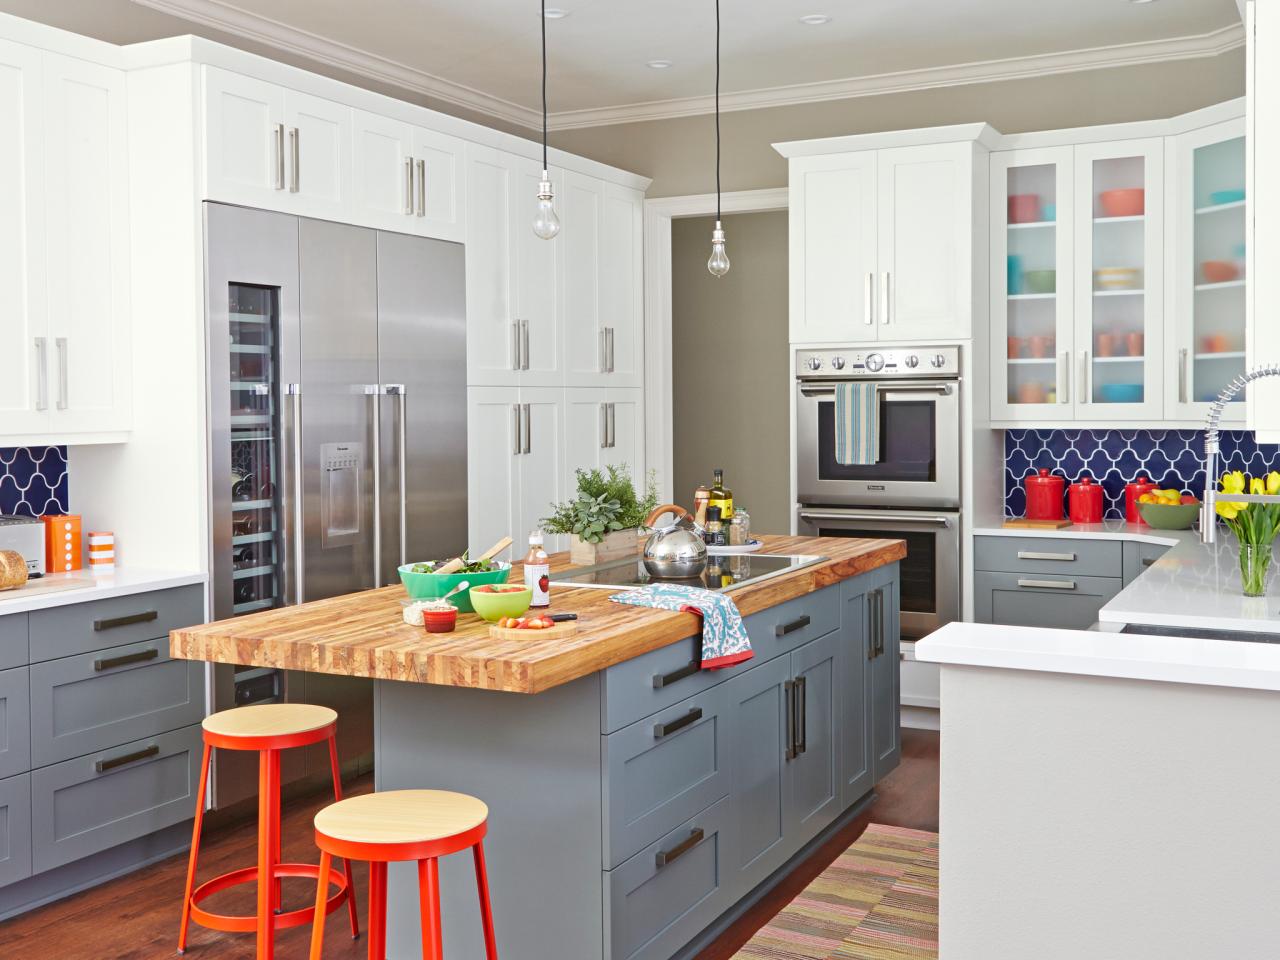 tips-for-kitchen-remodels-kitchen-ideas-design-with-cabinets